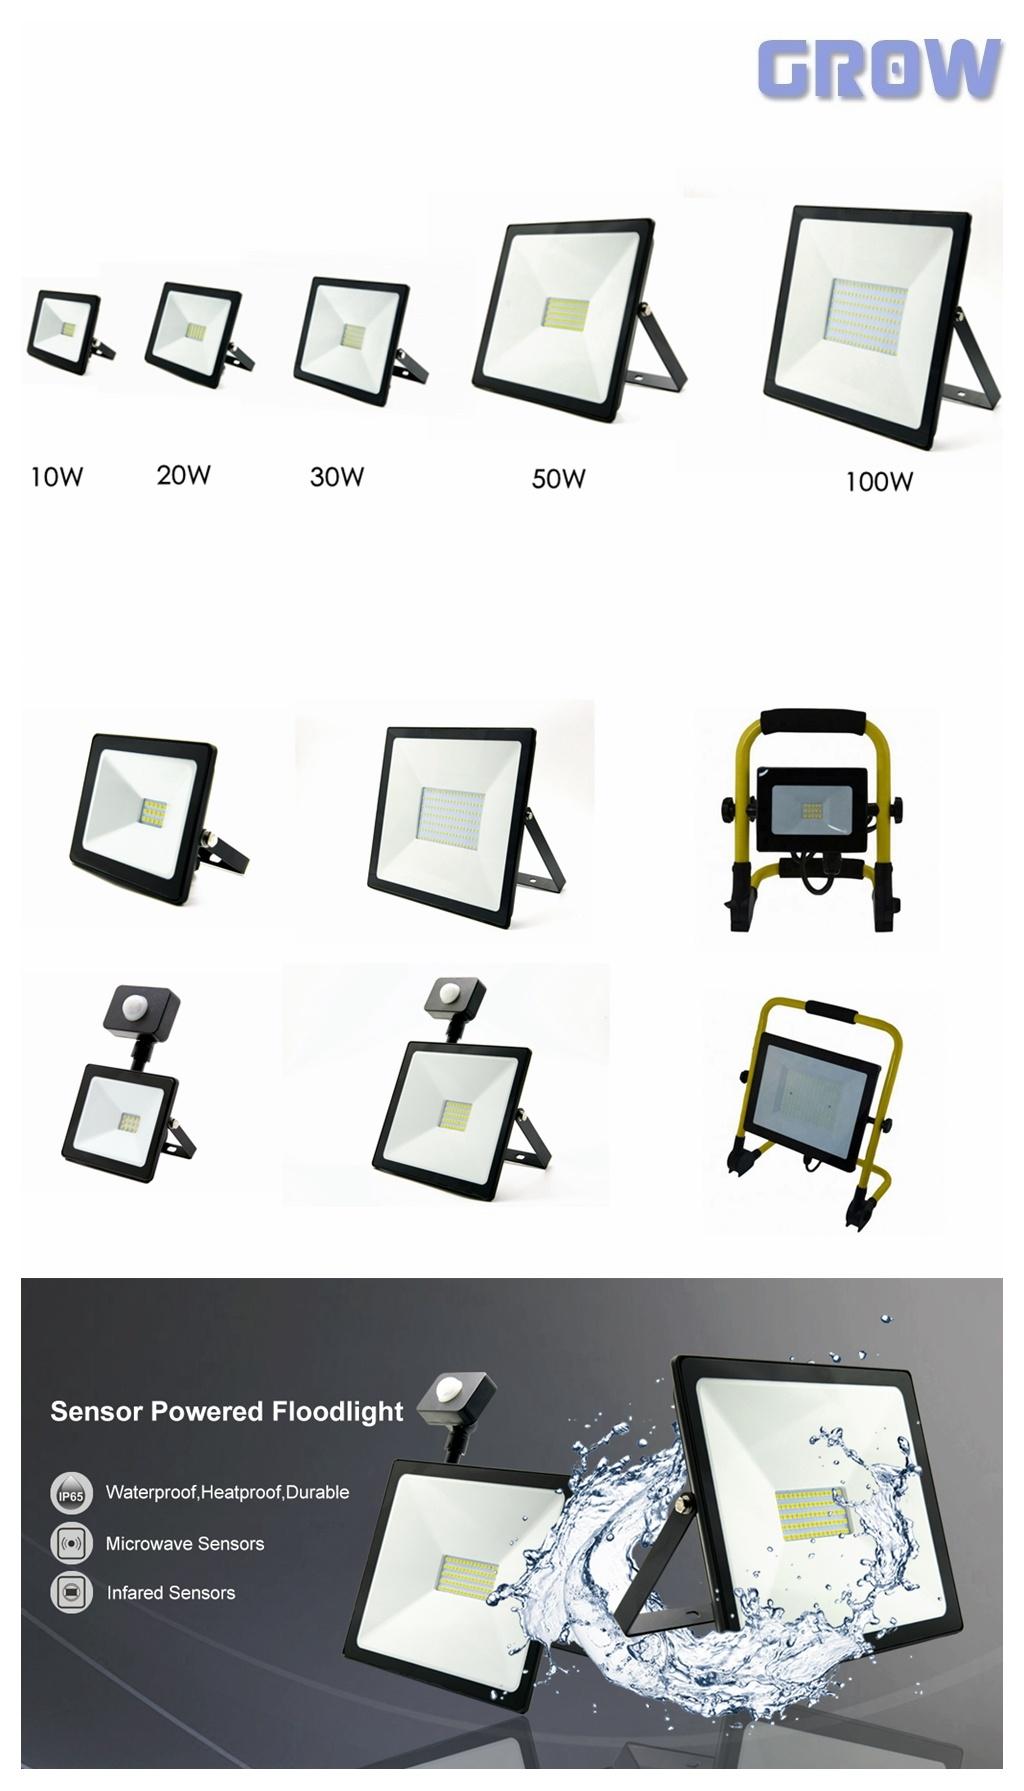 Distributor of 150W LED Outdoor Floodlight with High Power and High Lumen